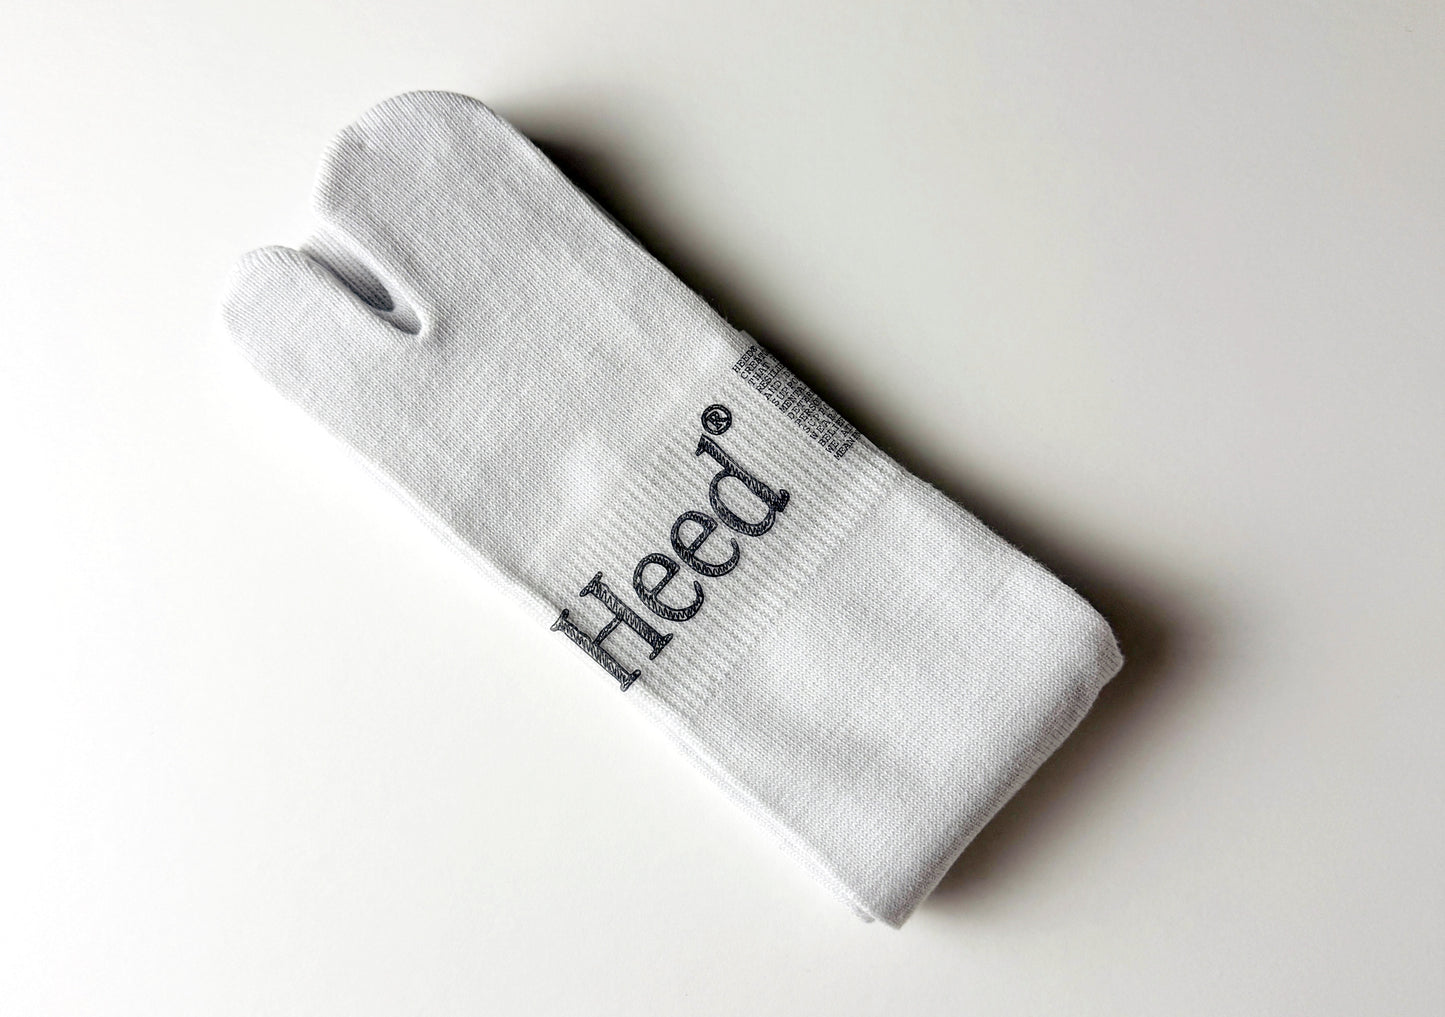 Heed Traditional Jika Tabi Toe Socks - Cotton Breathable Arch Support Socks (White):  Flat-lay image of the Heed white cotton Jika Tabi toe socks. The socks feature the iconic split-toe design and a tube sock silhouette for a secure, comfortable fit. The reinforced arch support and breathable cotton material are also visible in the image. From your Mental Health and Self Care Streetwear Clothing Brand.